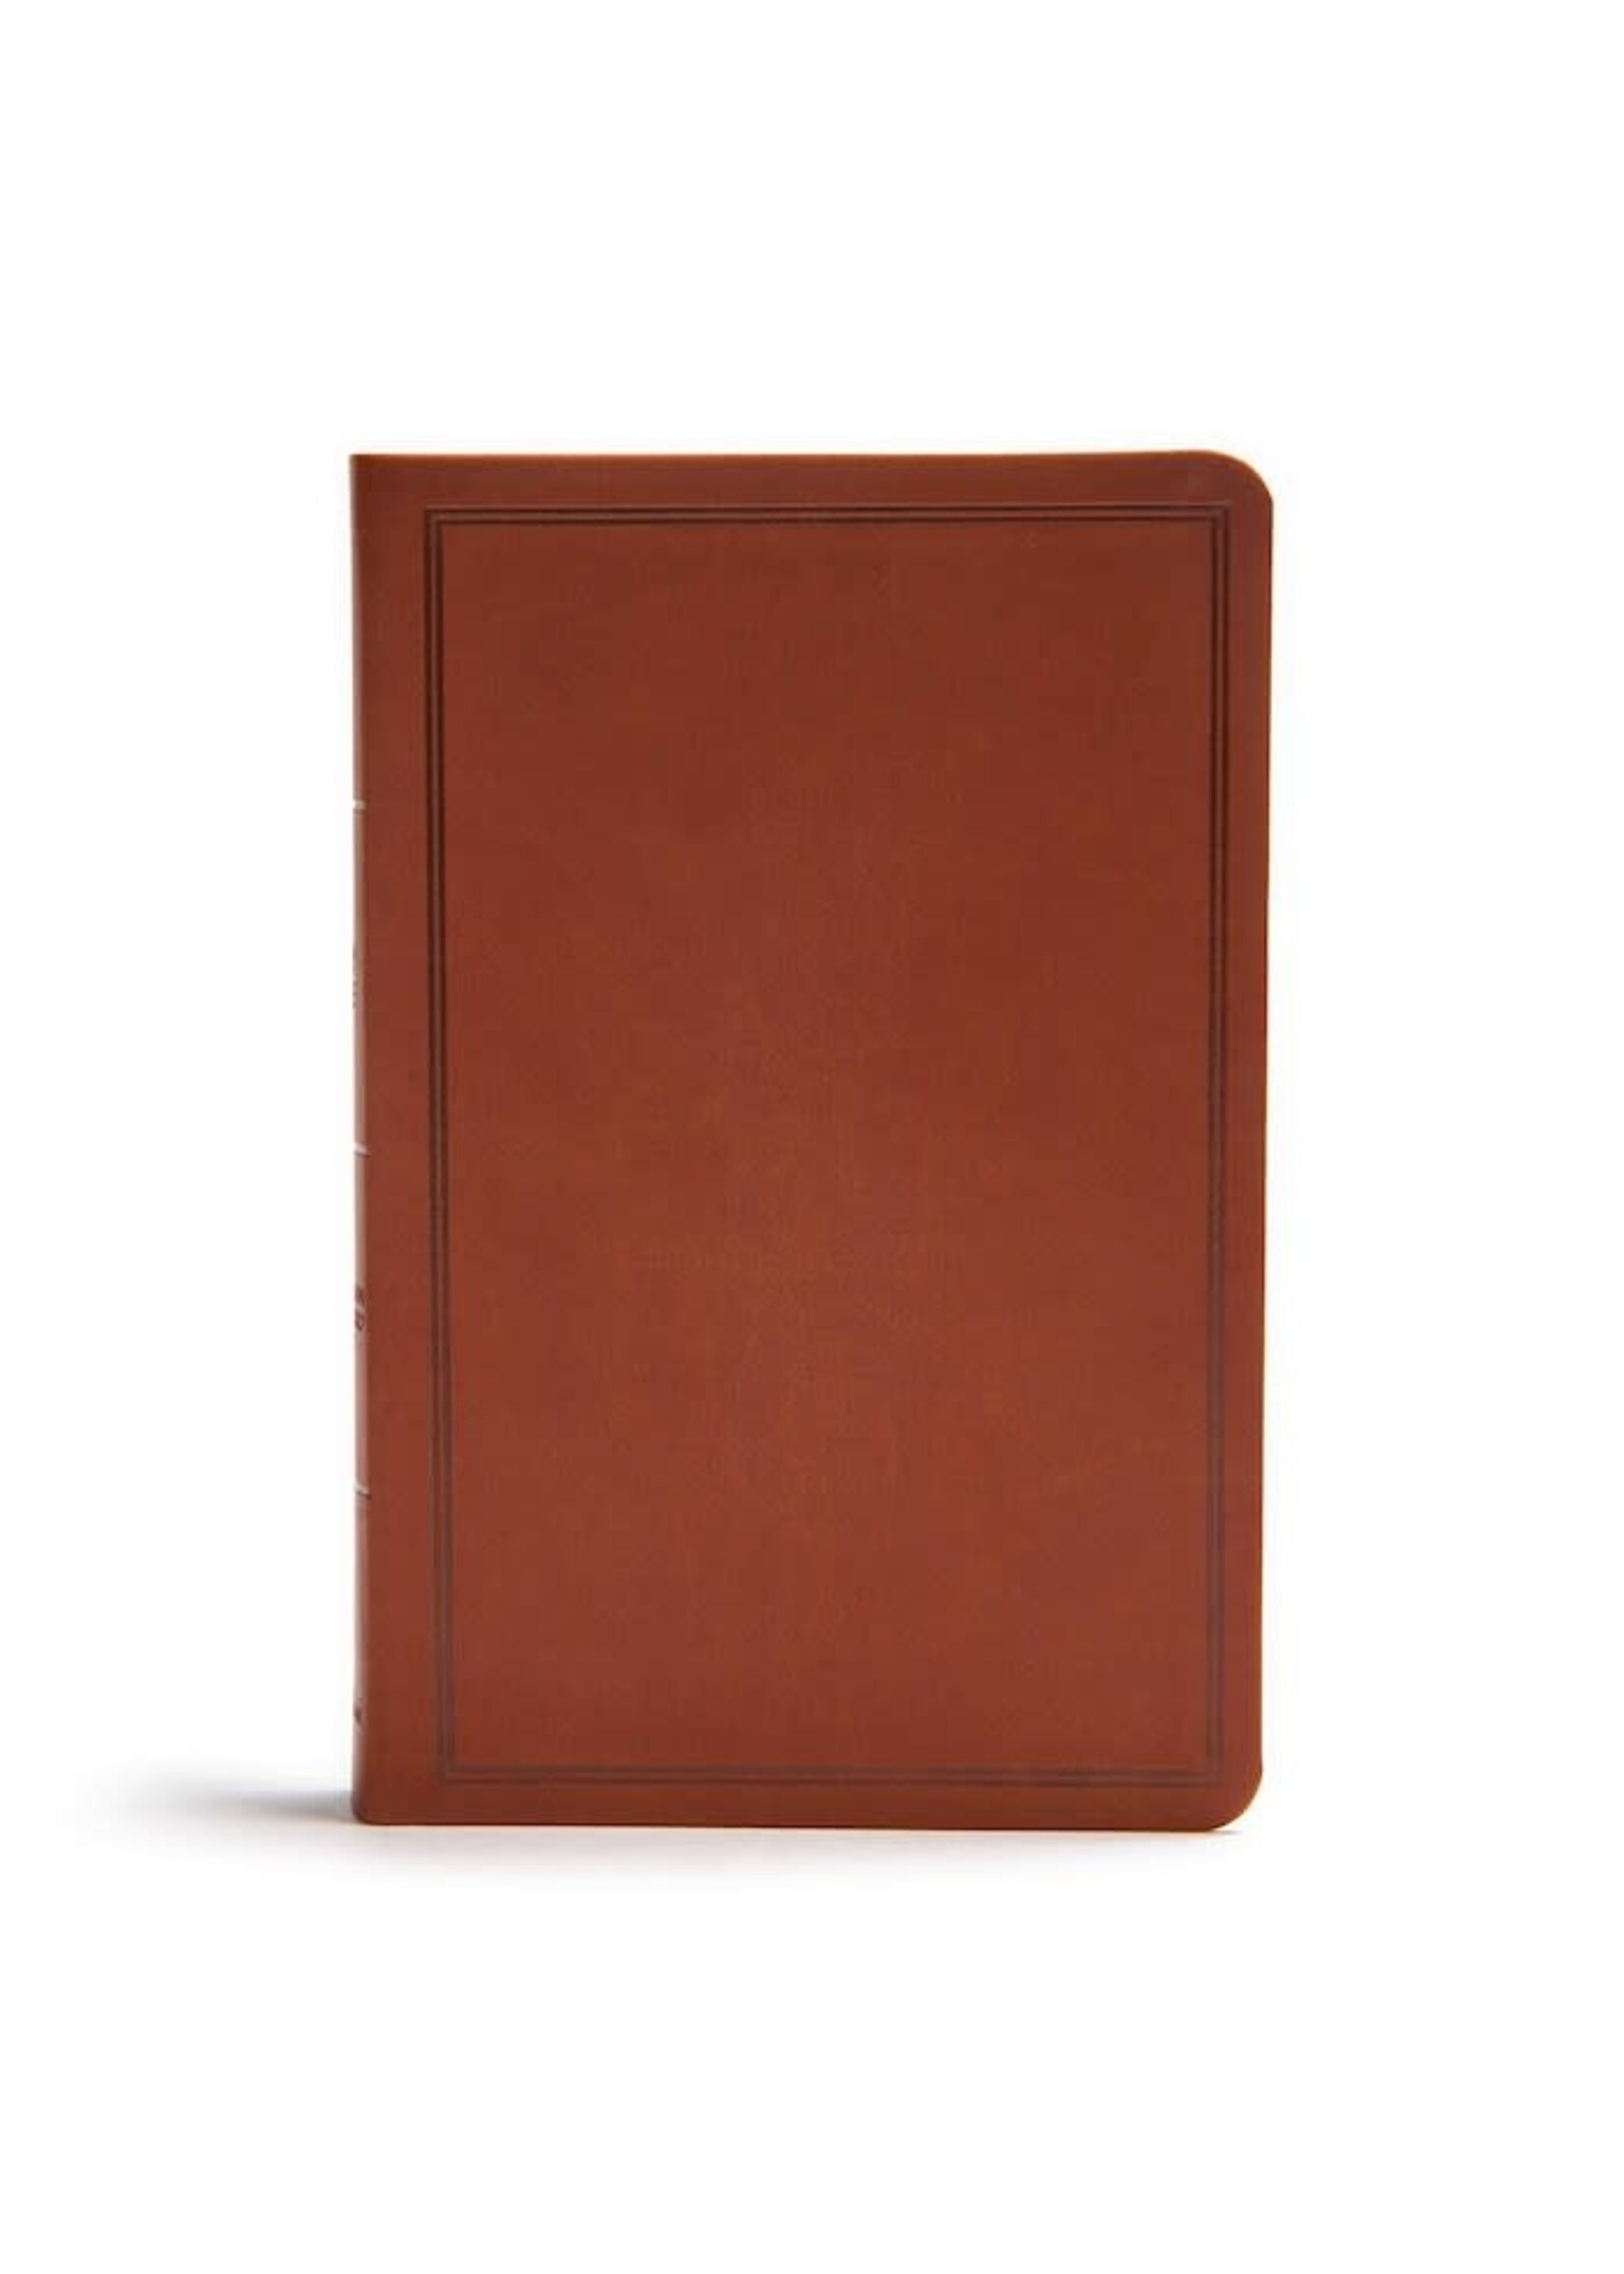 B-CSB DELUXE GIFT BIBLE